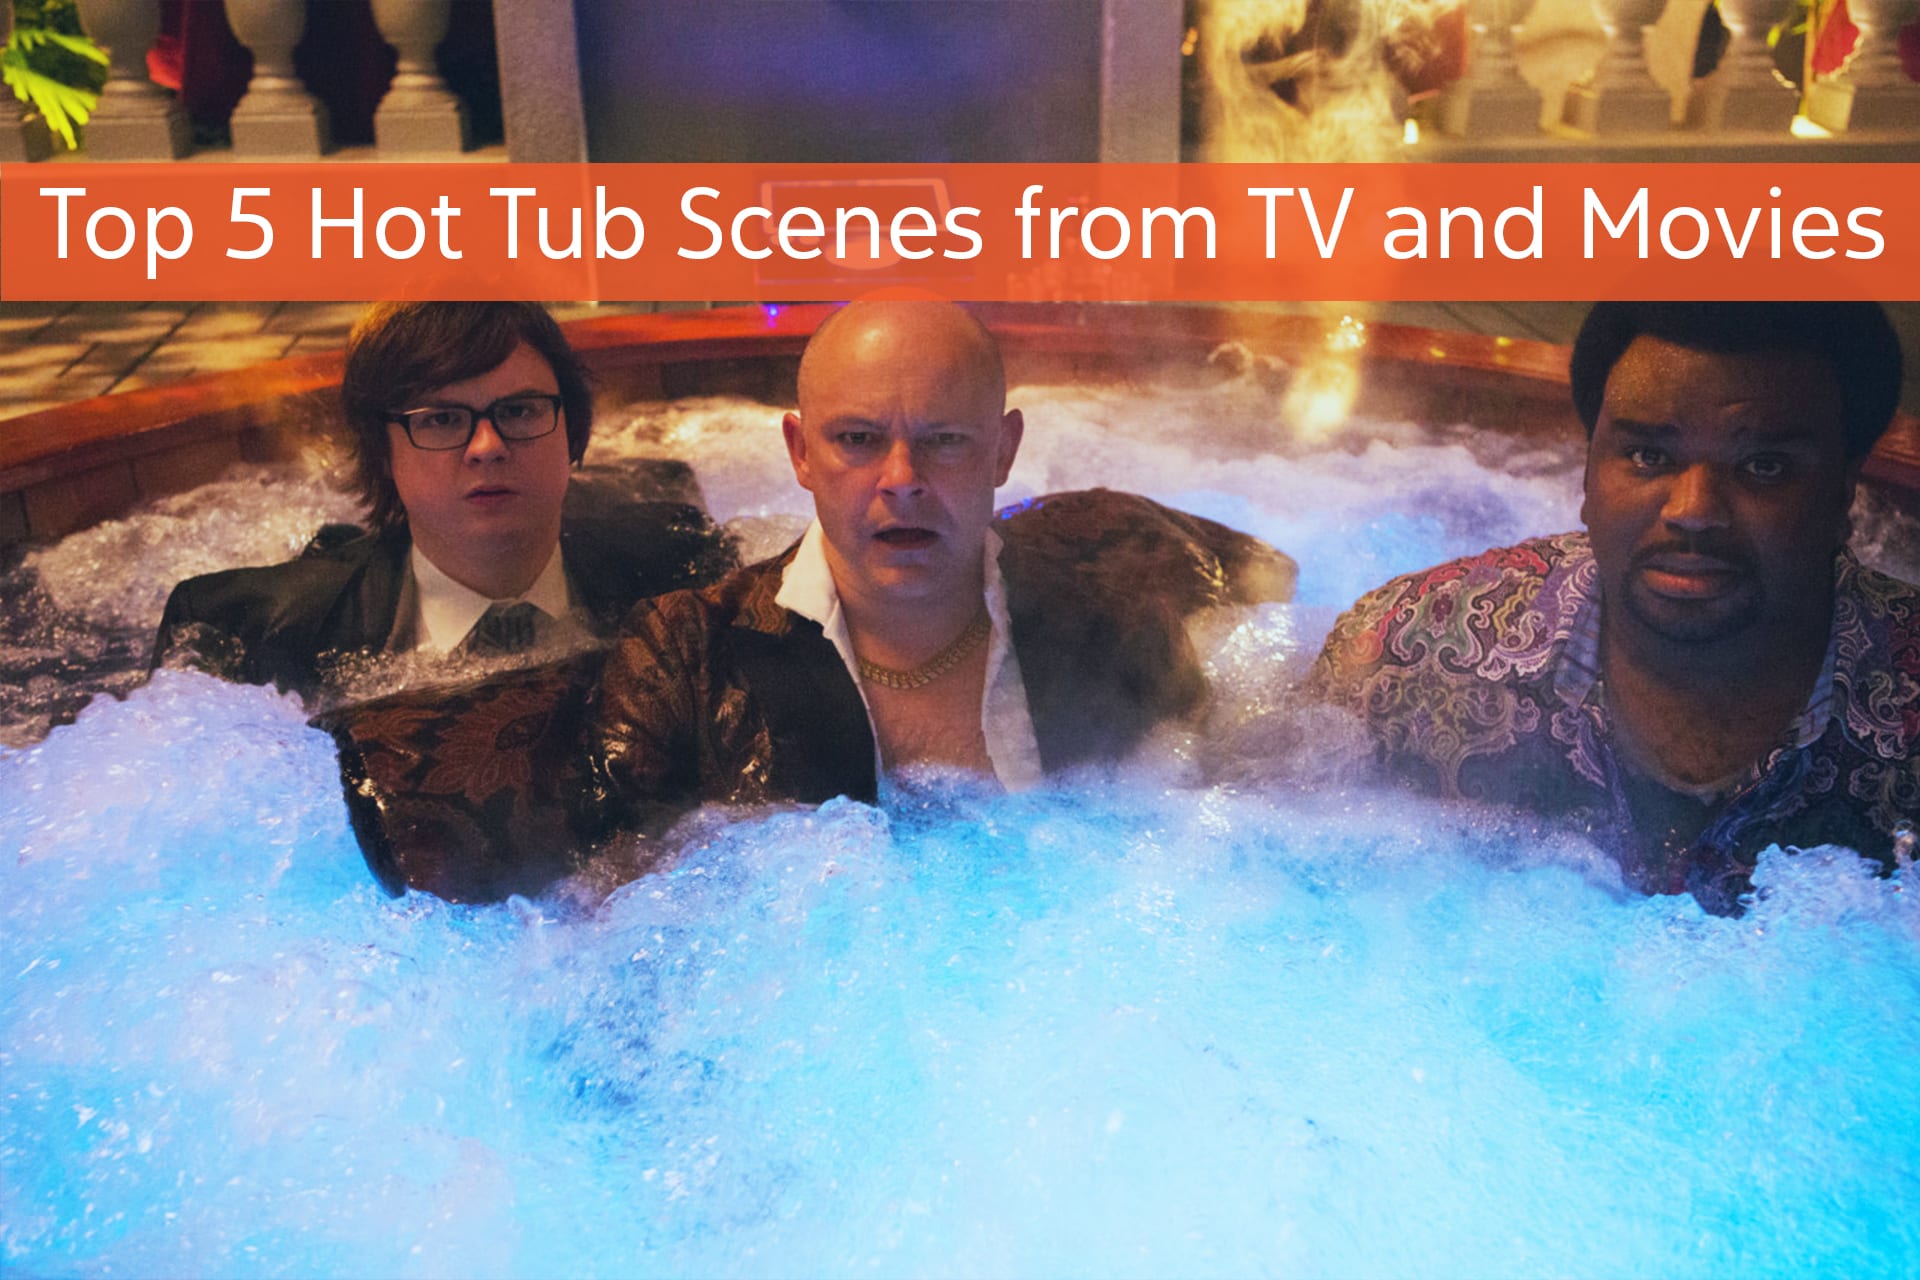 Top 5 Hot Tub or Hot Water Scenes from TV and Movies